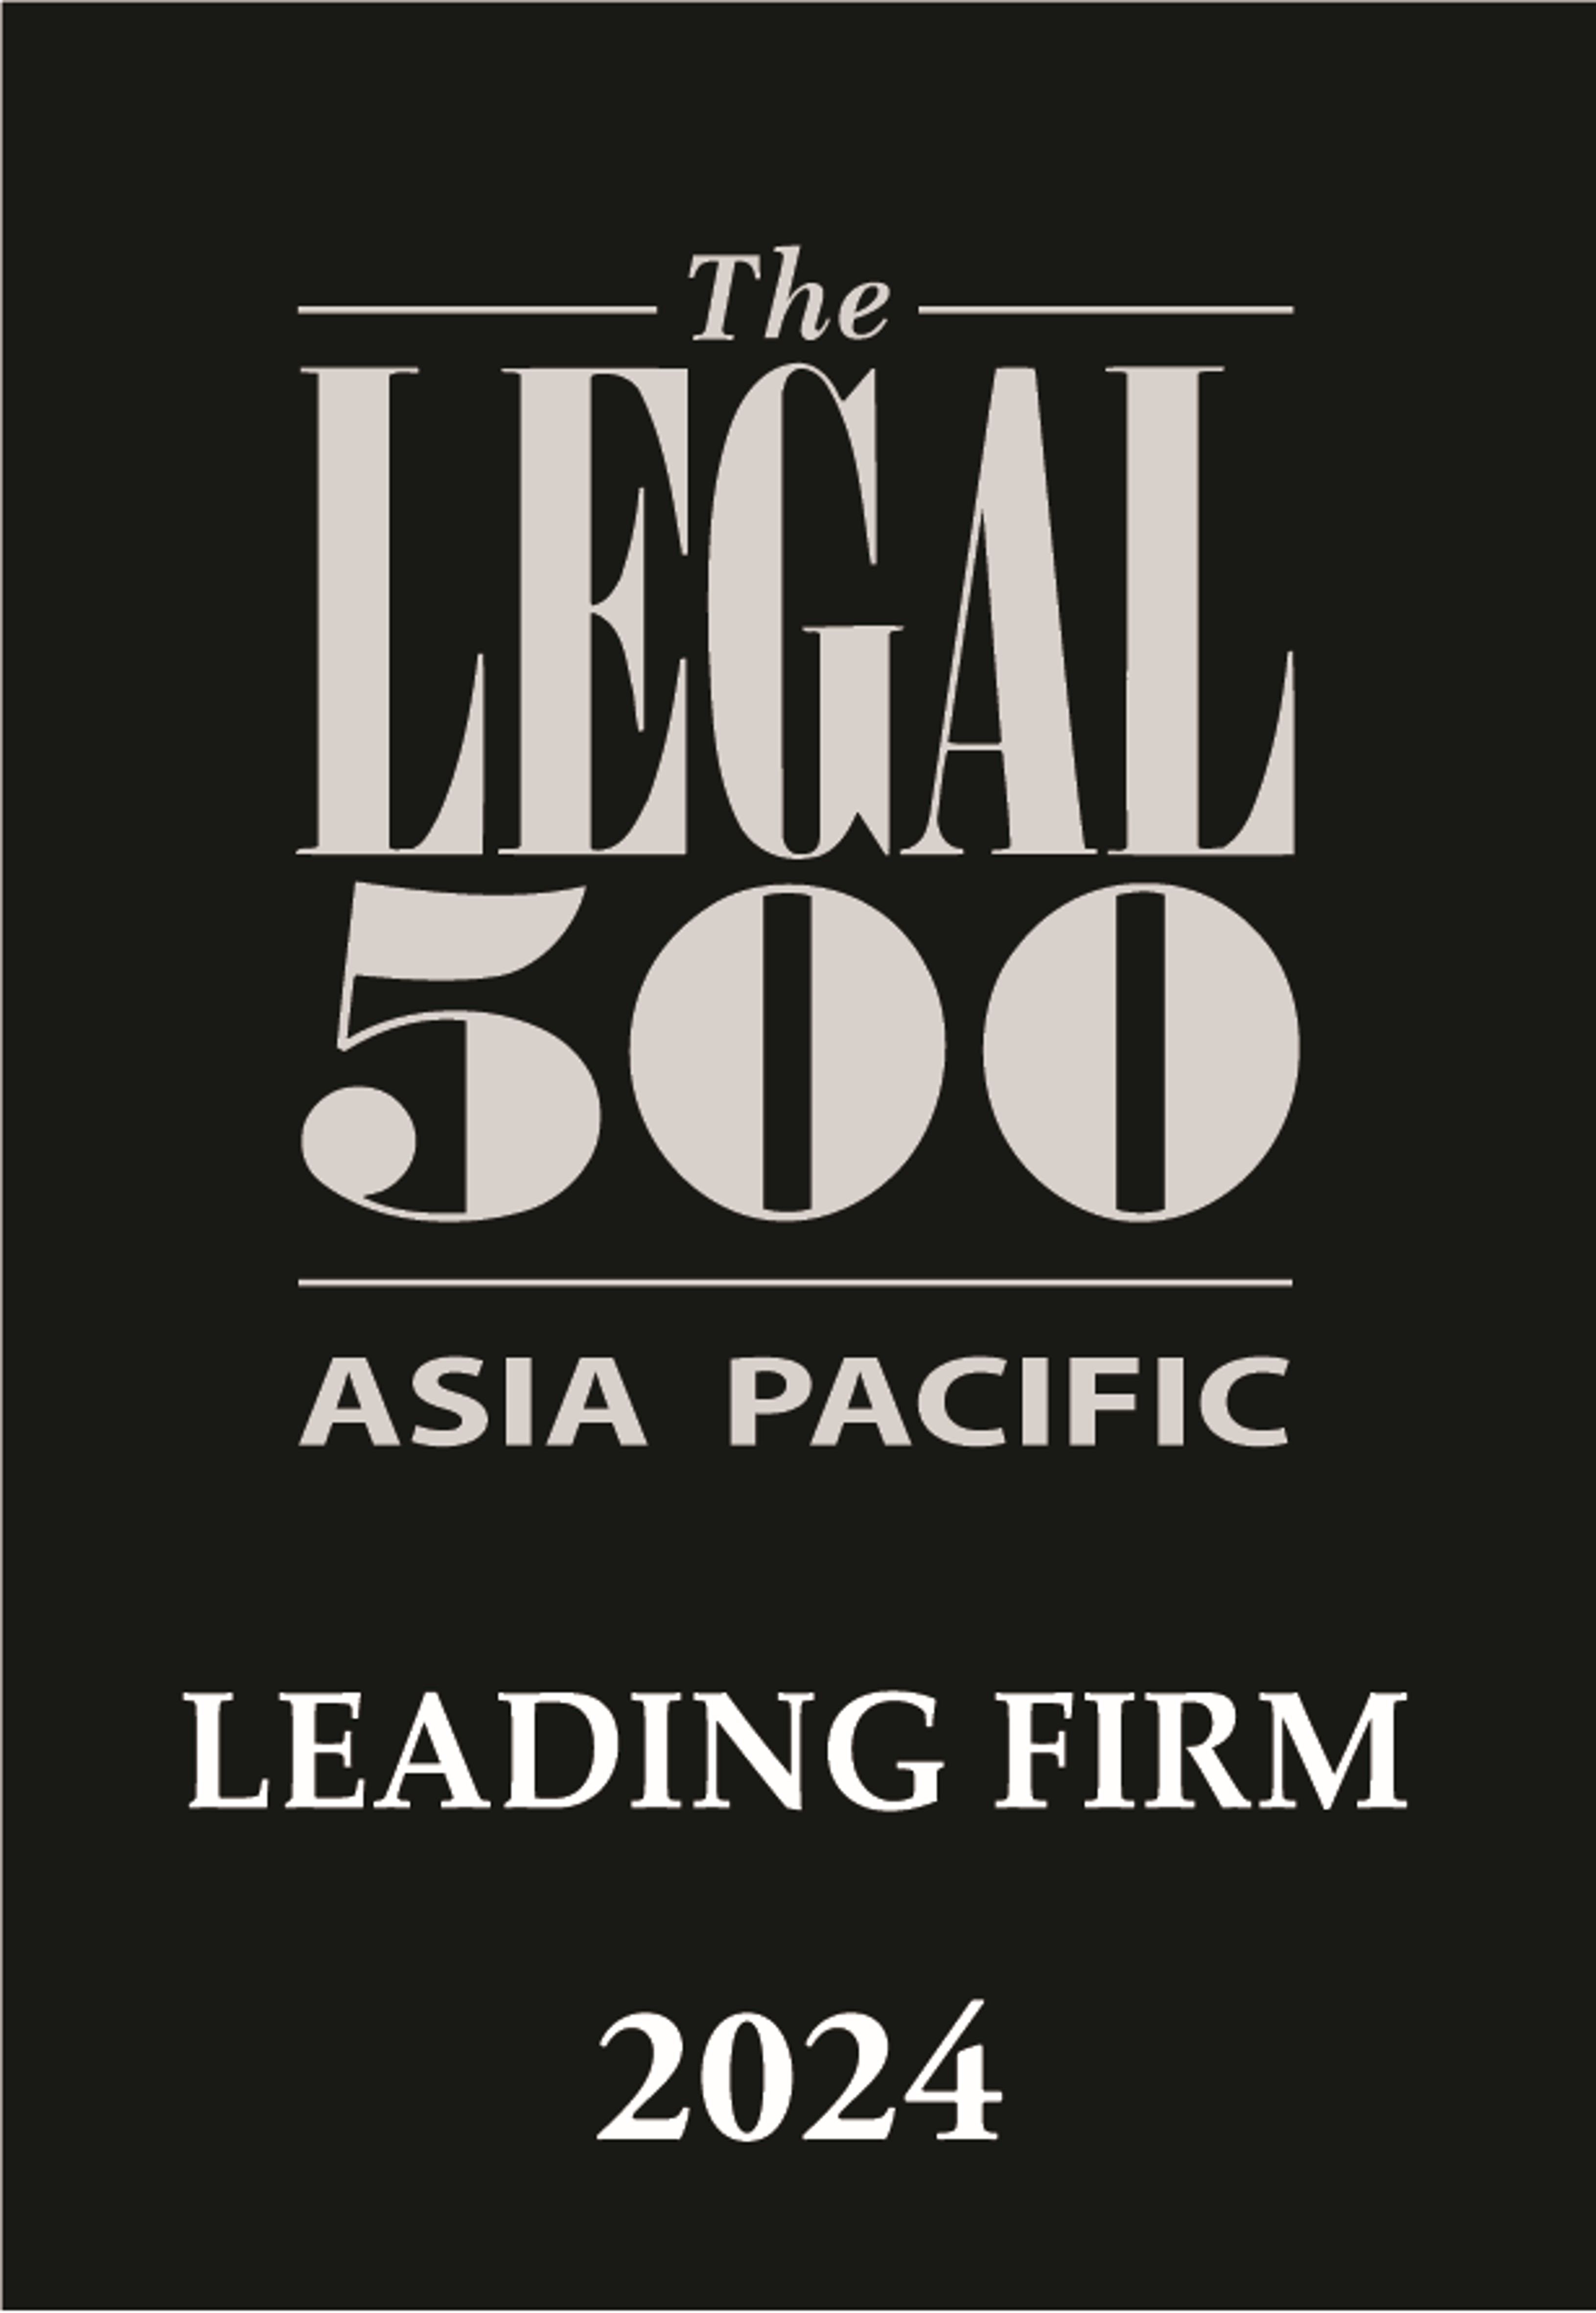 “Tier Two” Leading Firm in Commercial, corporate and M&A, independent Hong Kong law firms by The Legal 500 Asia Pacific, 2024